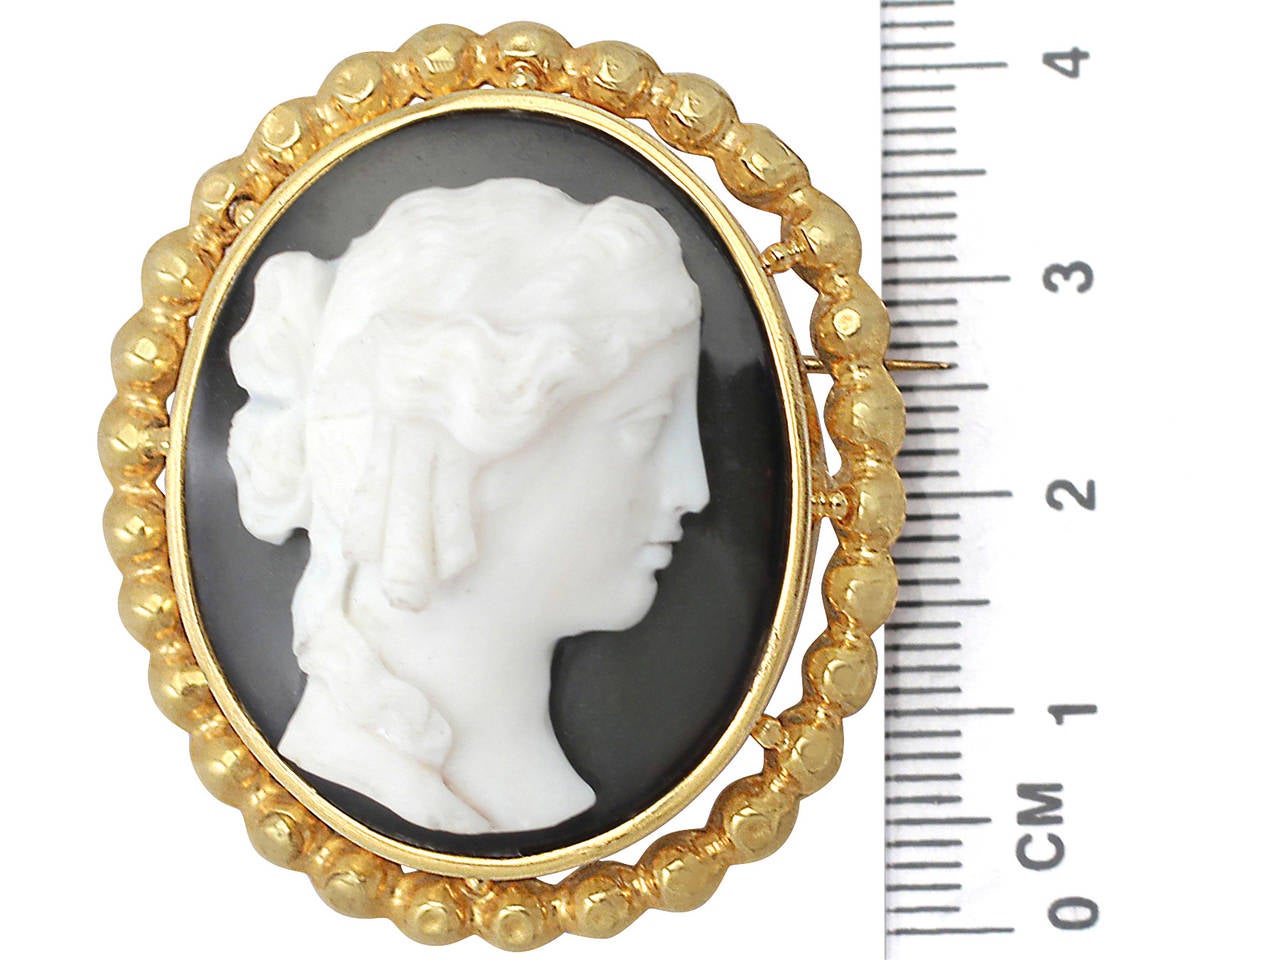 Cameo Brooch / Pendant in 18k Yellow Gold - Antique French Circa 1880 4